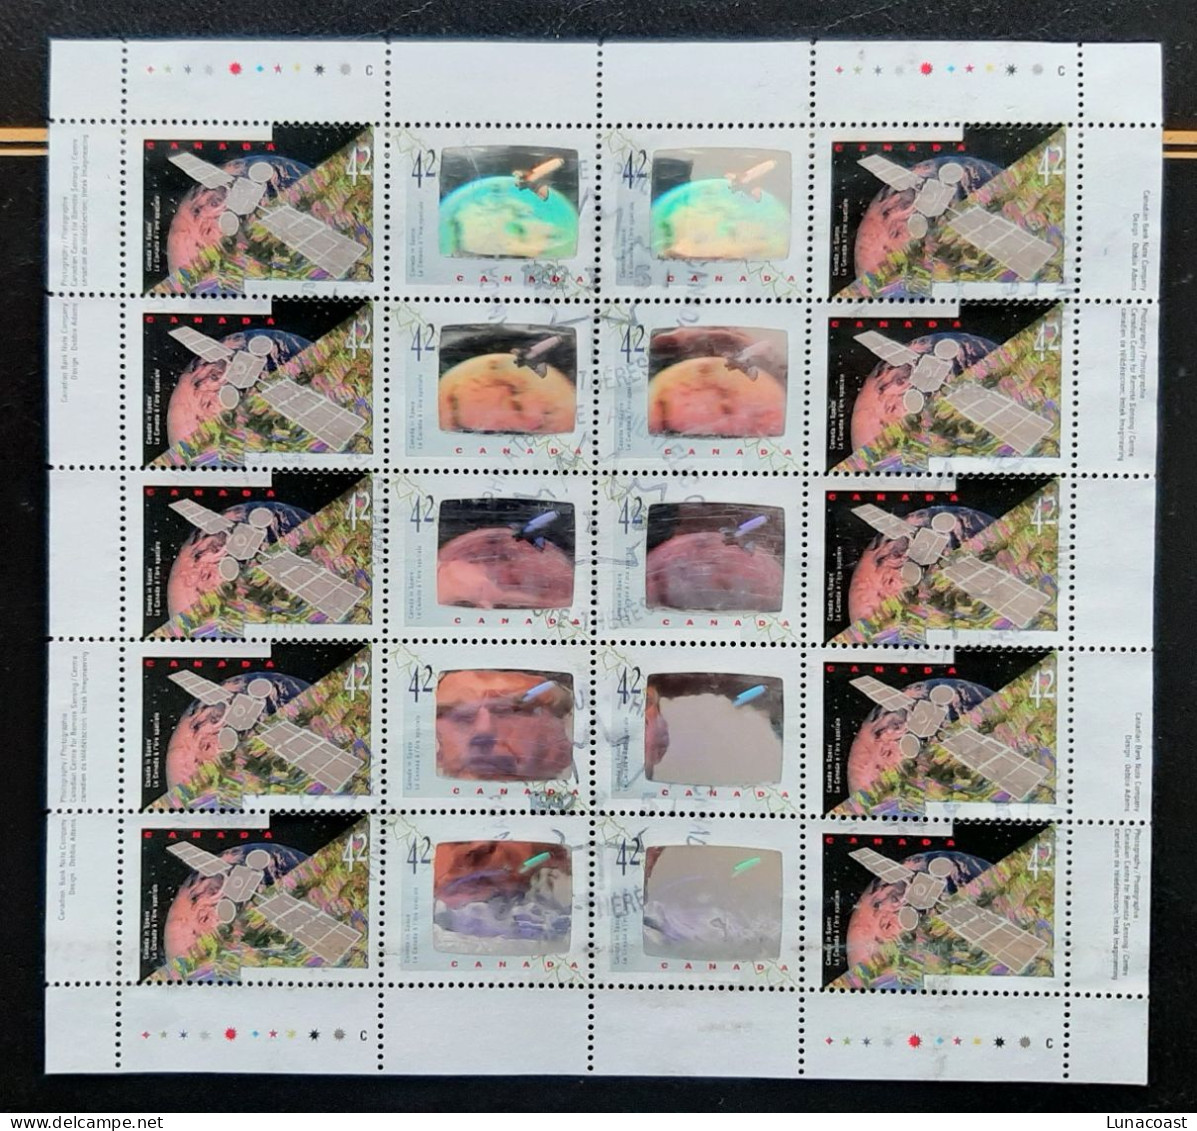 Canada 1992  USED  Sc1441-1442   20 X 42c Full Pane PB  Canada In Space - Used Stamps